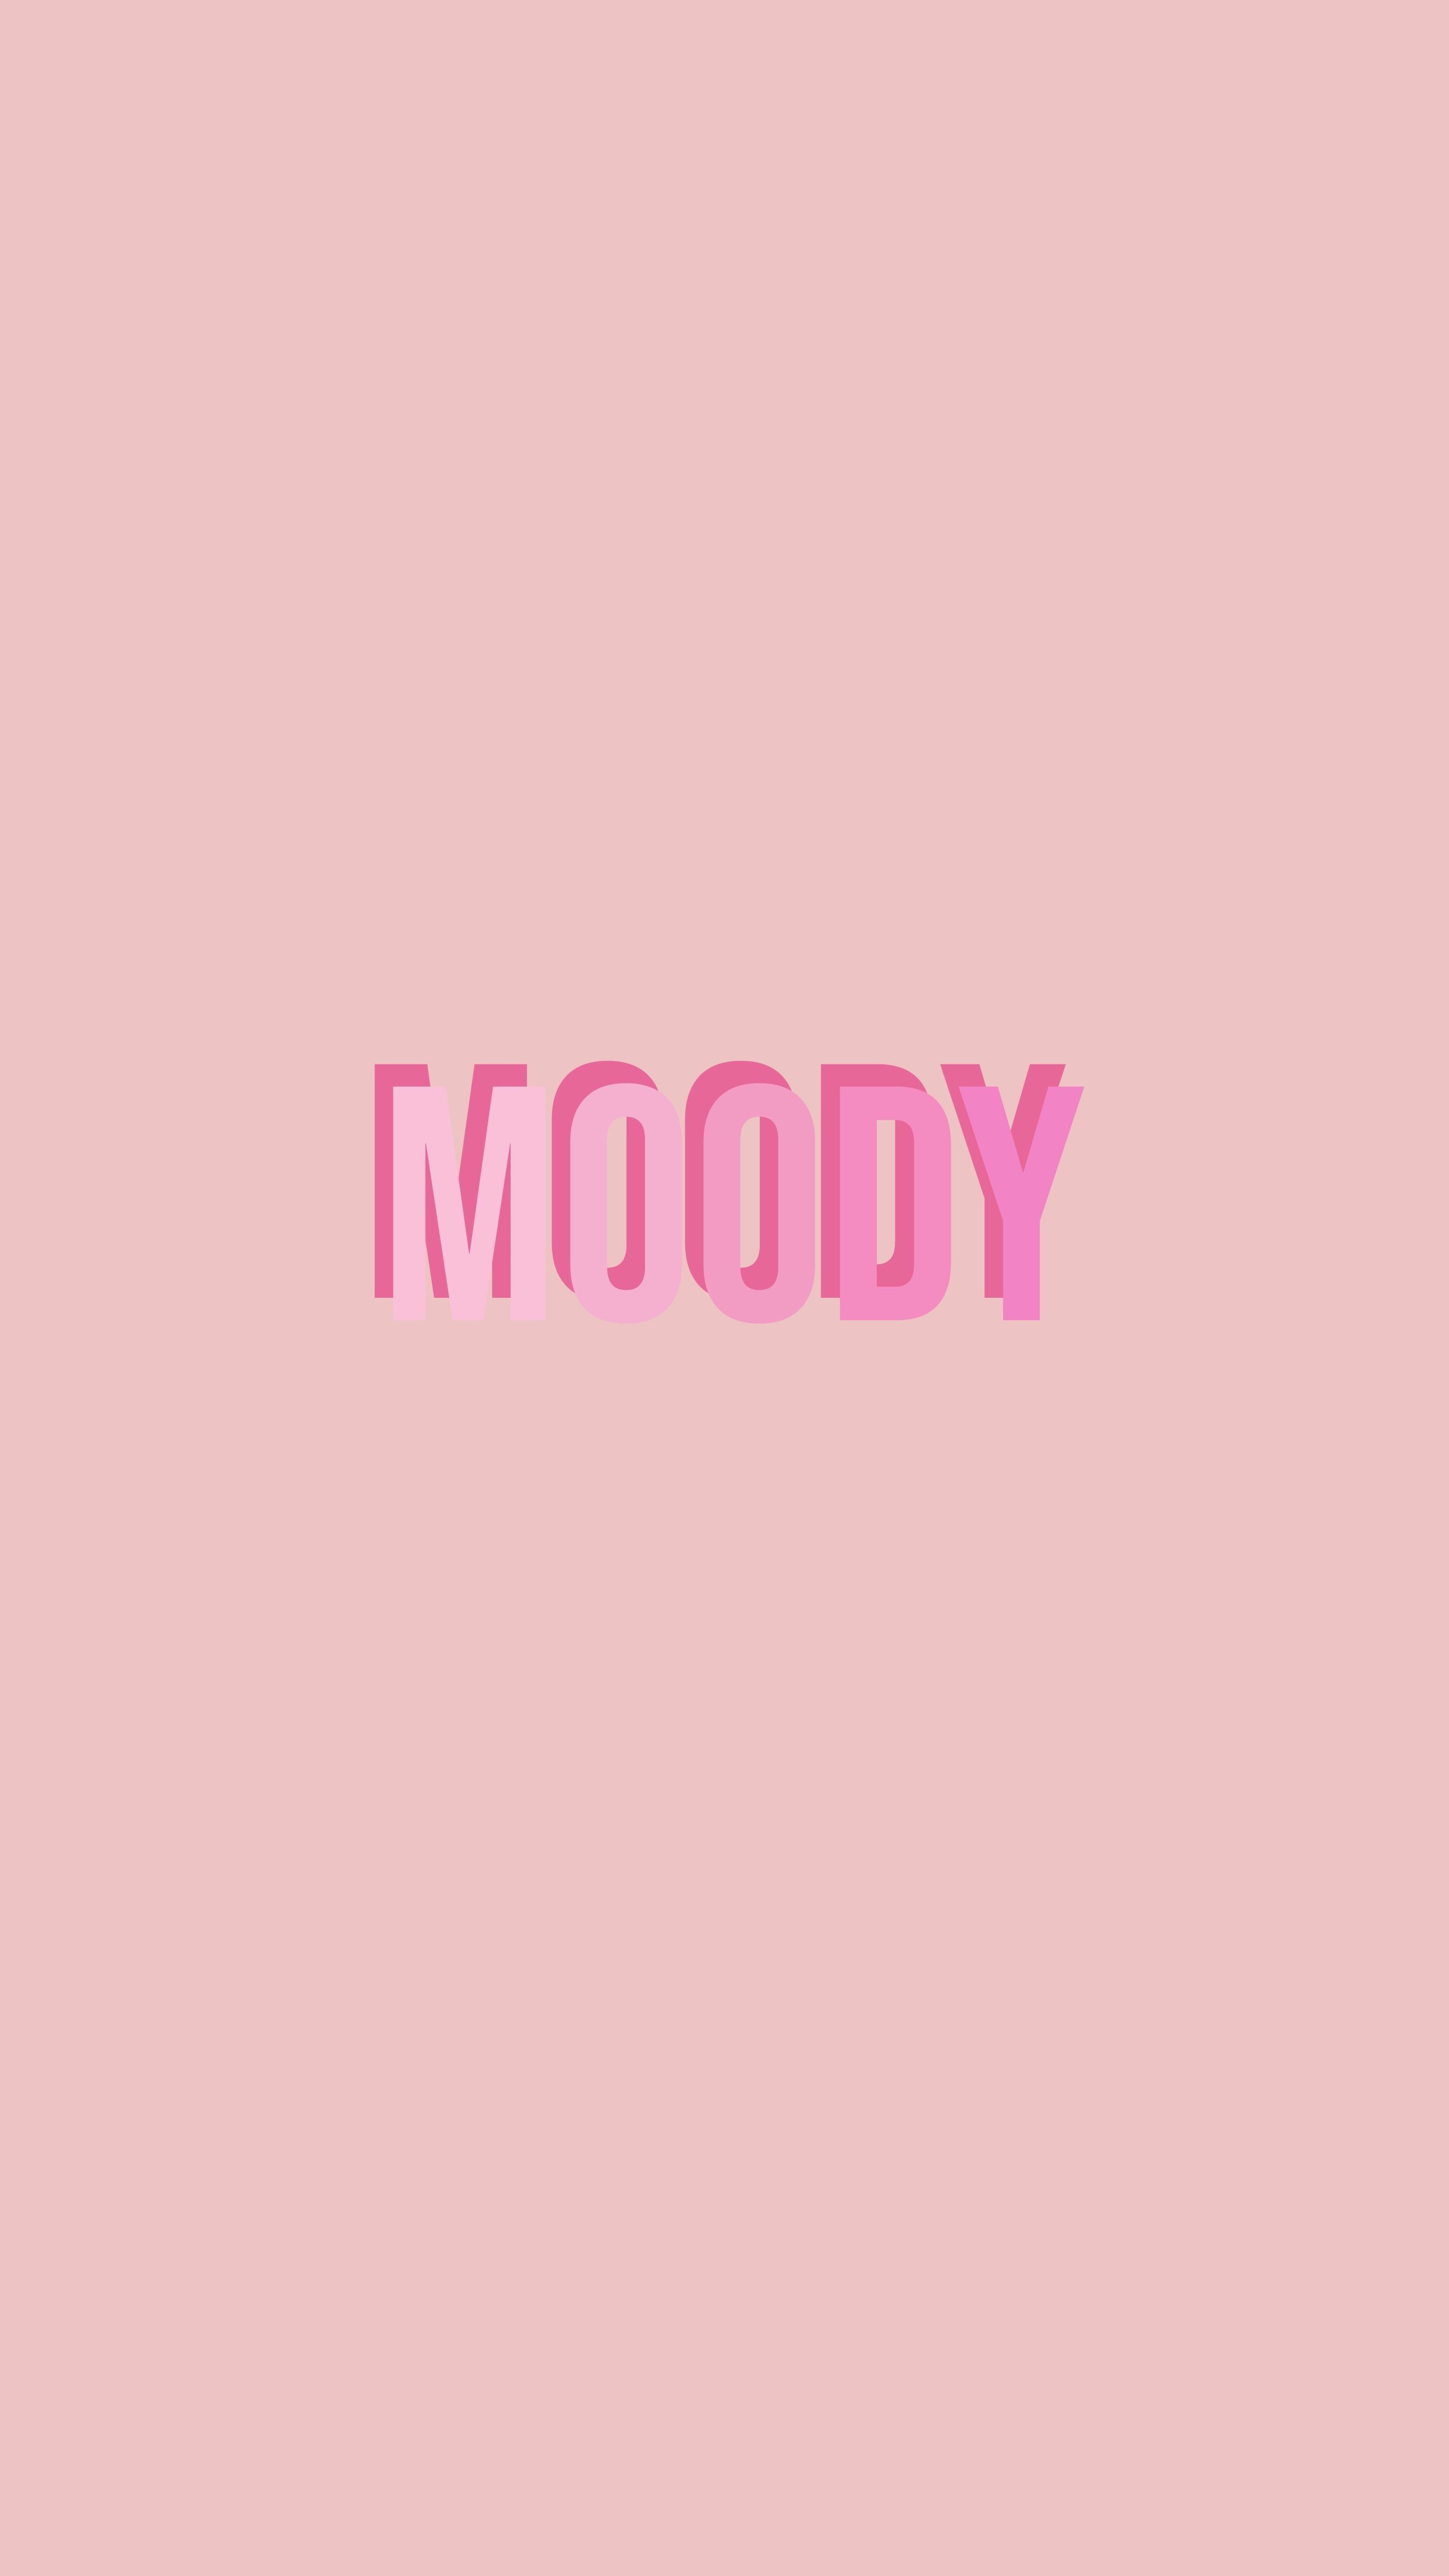 42+ Pastel Pink Background With Words